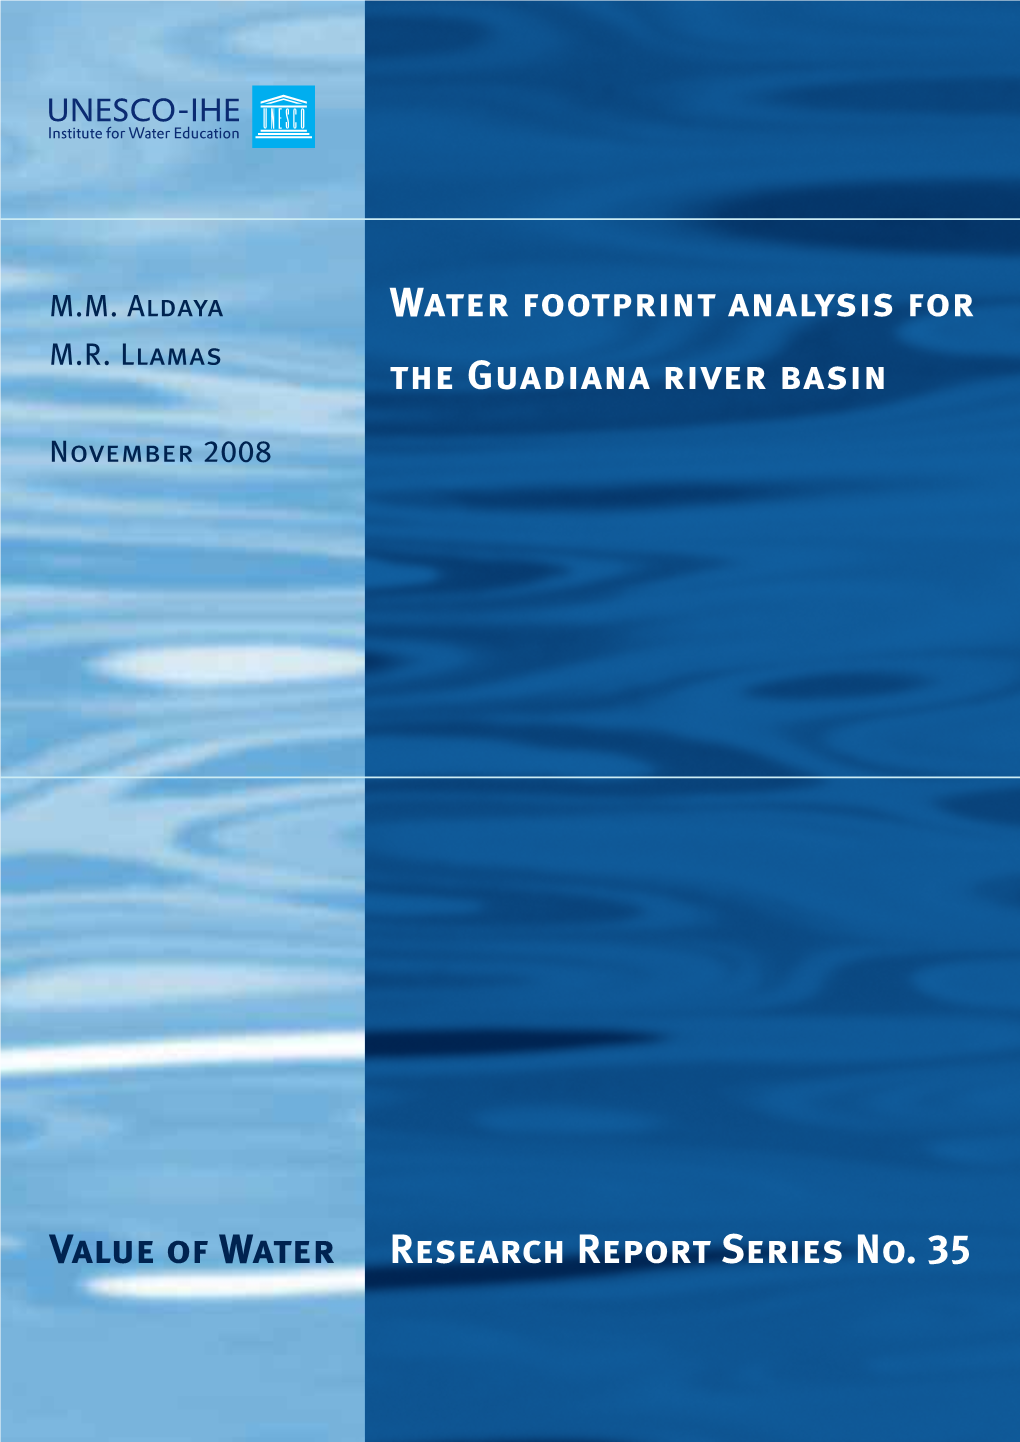 Water Footprint Analysis for the Guadiana River Basin